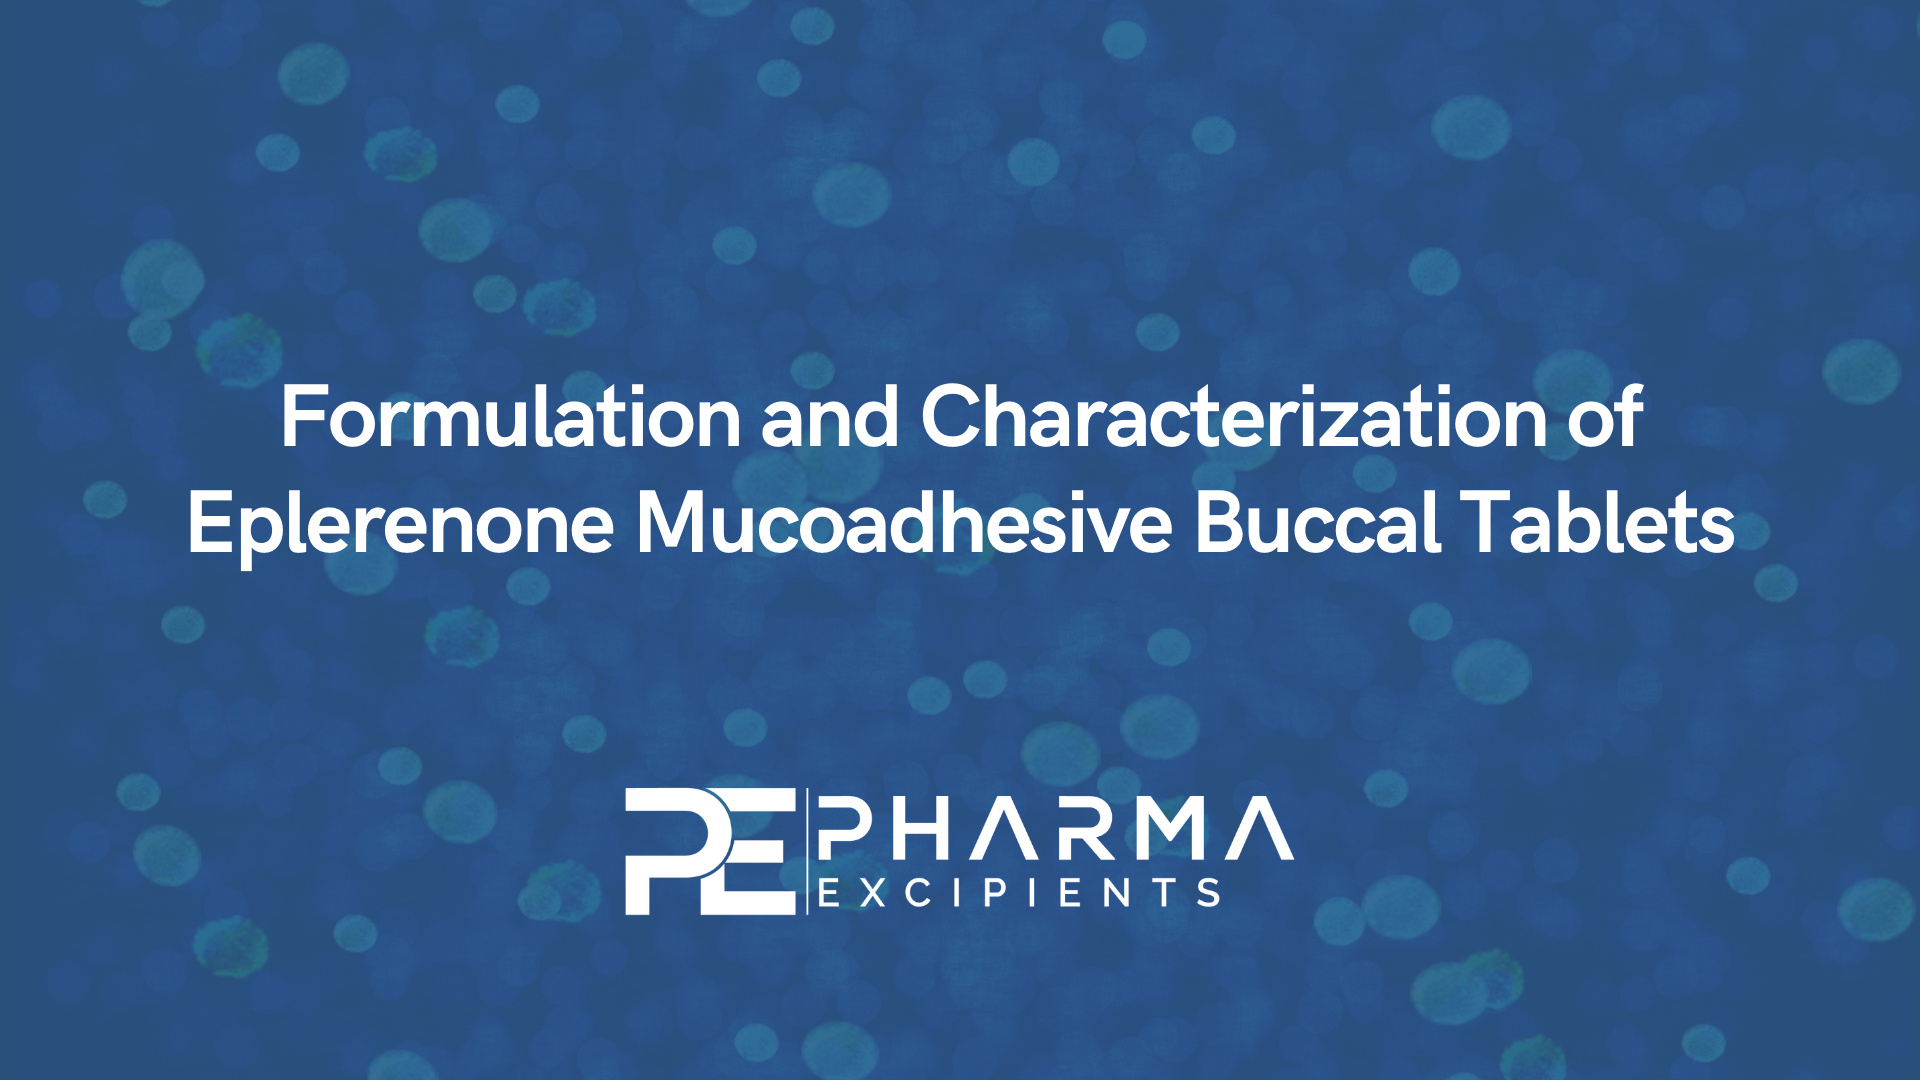 Formulation and Characterization of Eplerenone Mucoadhesive Buccal Tablets